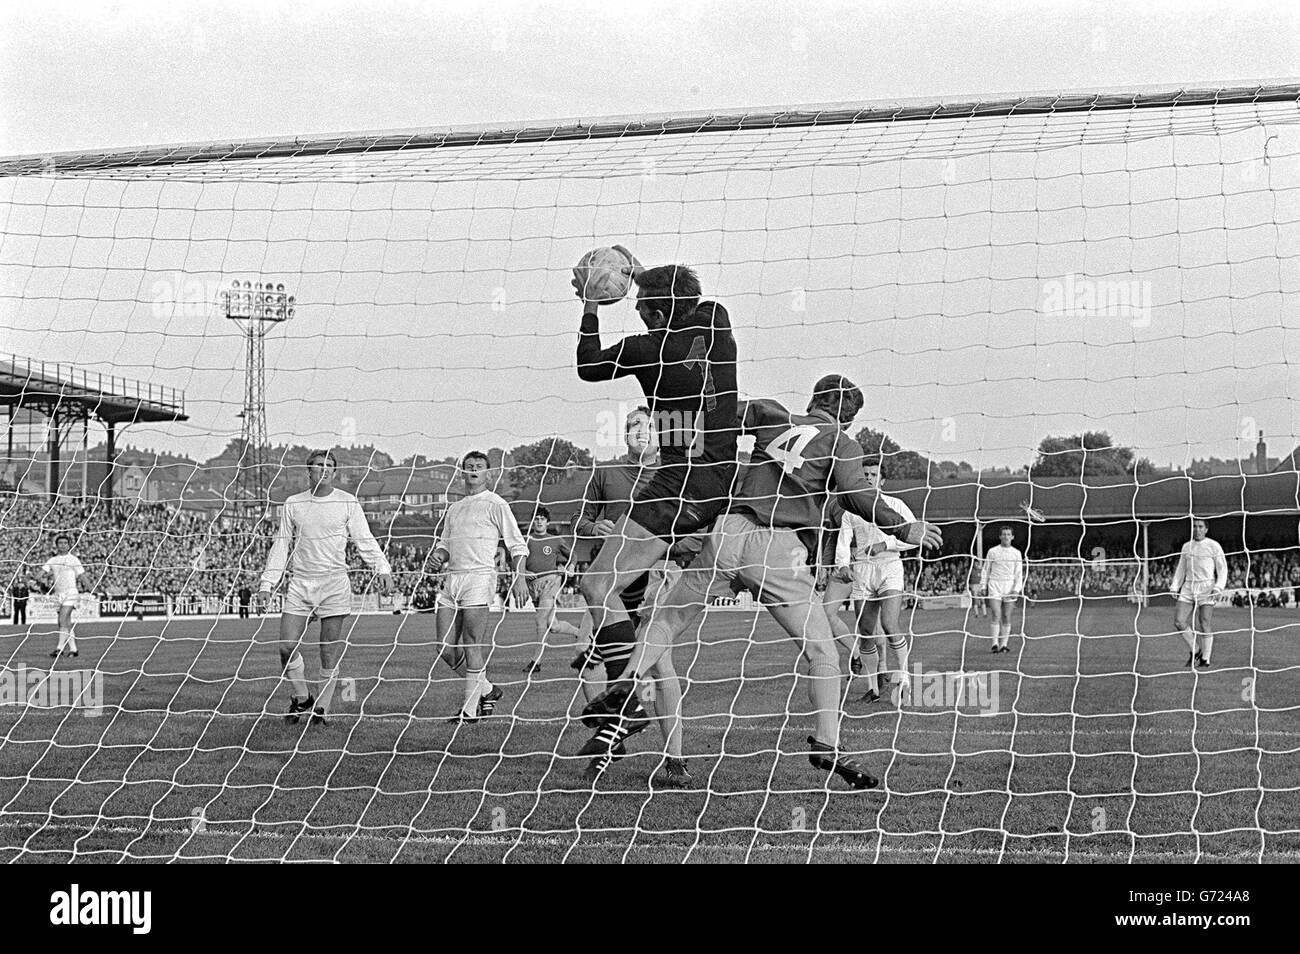 Geczi, the Ferencvaros (Hungary) goalkeeper, leaps to avoid Billie Bremner of Leeds United in the goalmouth and take the ball during the Inter-Cities Fairs Cup Final (first leg) at Elland Road, Leeds. Jones of Leeds runs in. Stock Photo